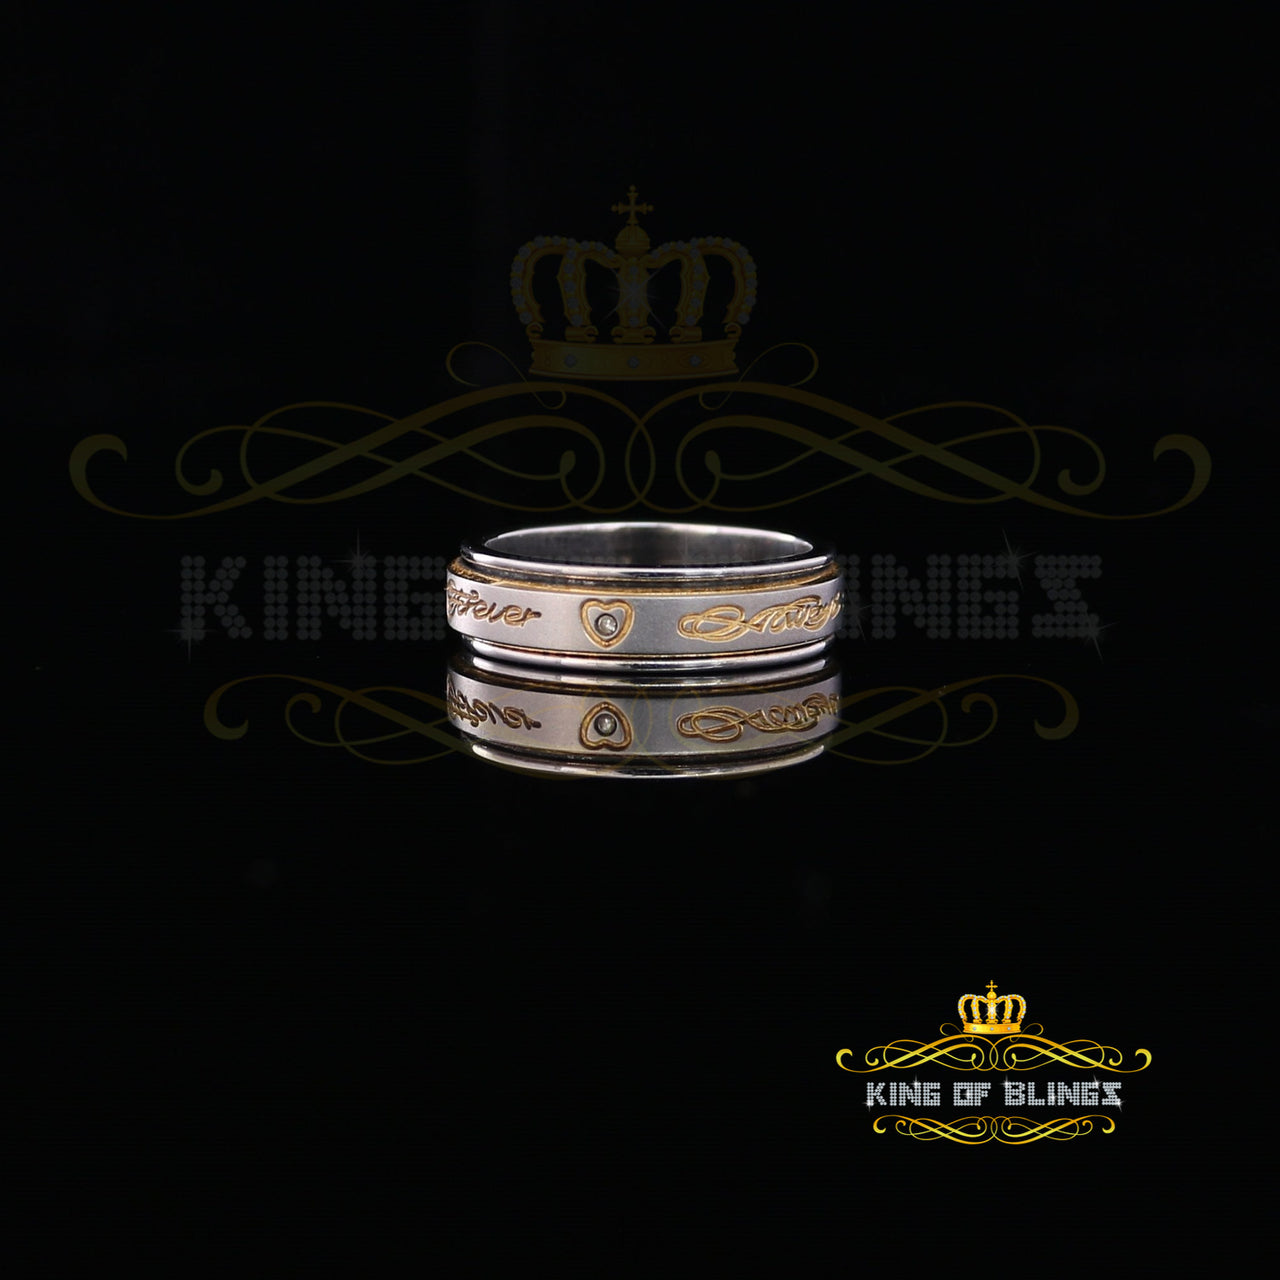 King Of Bling's Titnium White 0.01CT Diamond Mens Two Tone Band Ring Size 8 and Size 9 KING OF BLINGS